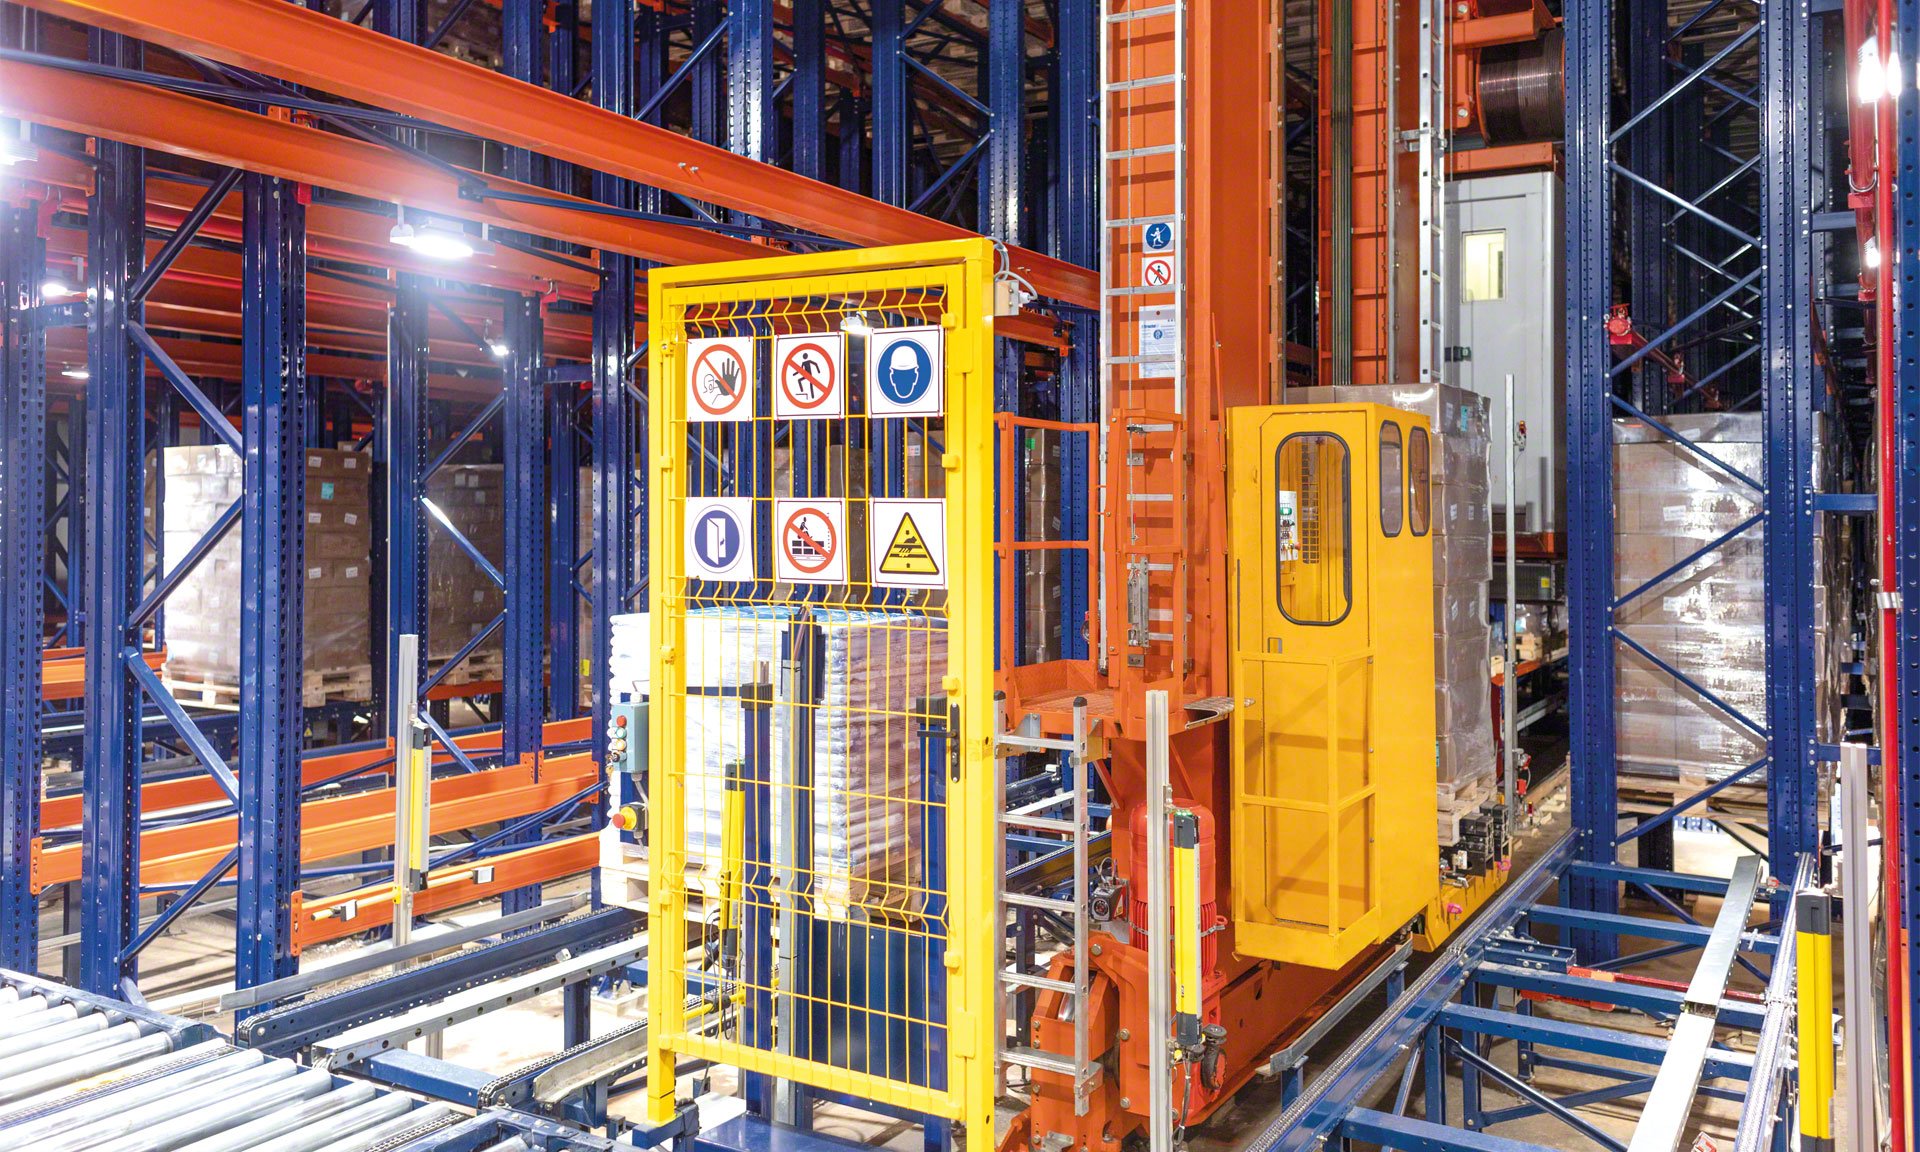 Copacol: automation and digitzation, key to food safety